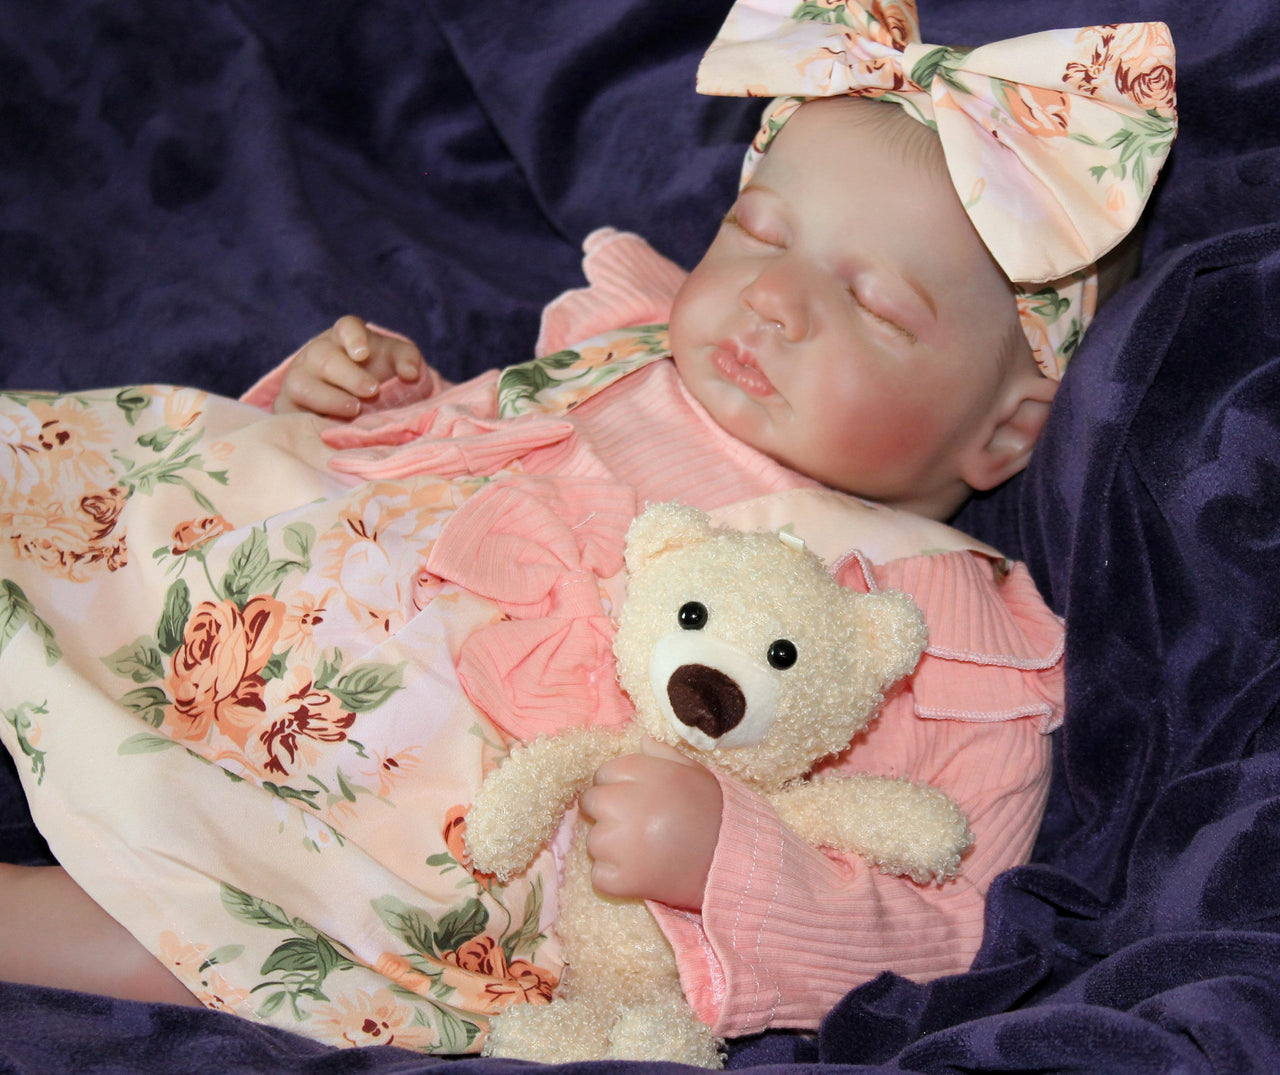 Painted Finished Reborn 2 to 8 Pounds Lifelike Baby Doll 20” Weighted Newborn Baby Heavy Dolls For Children Child Friendly Gifts For Girls